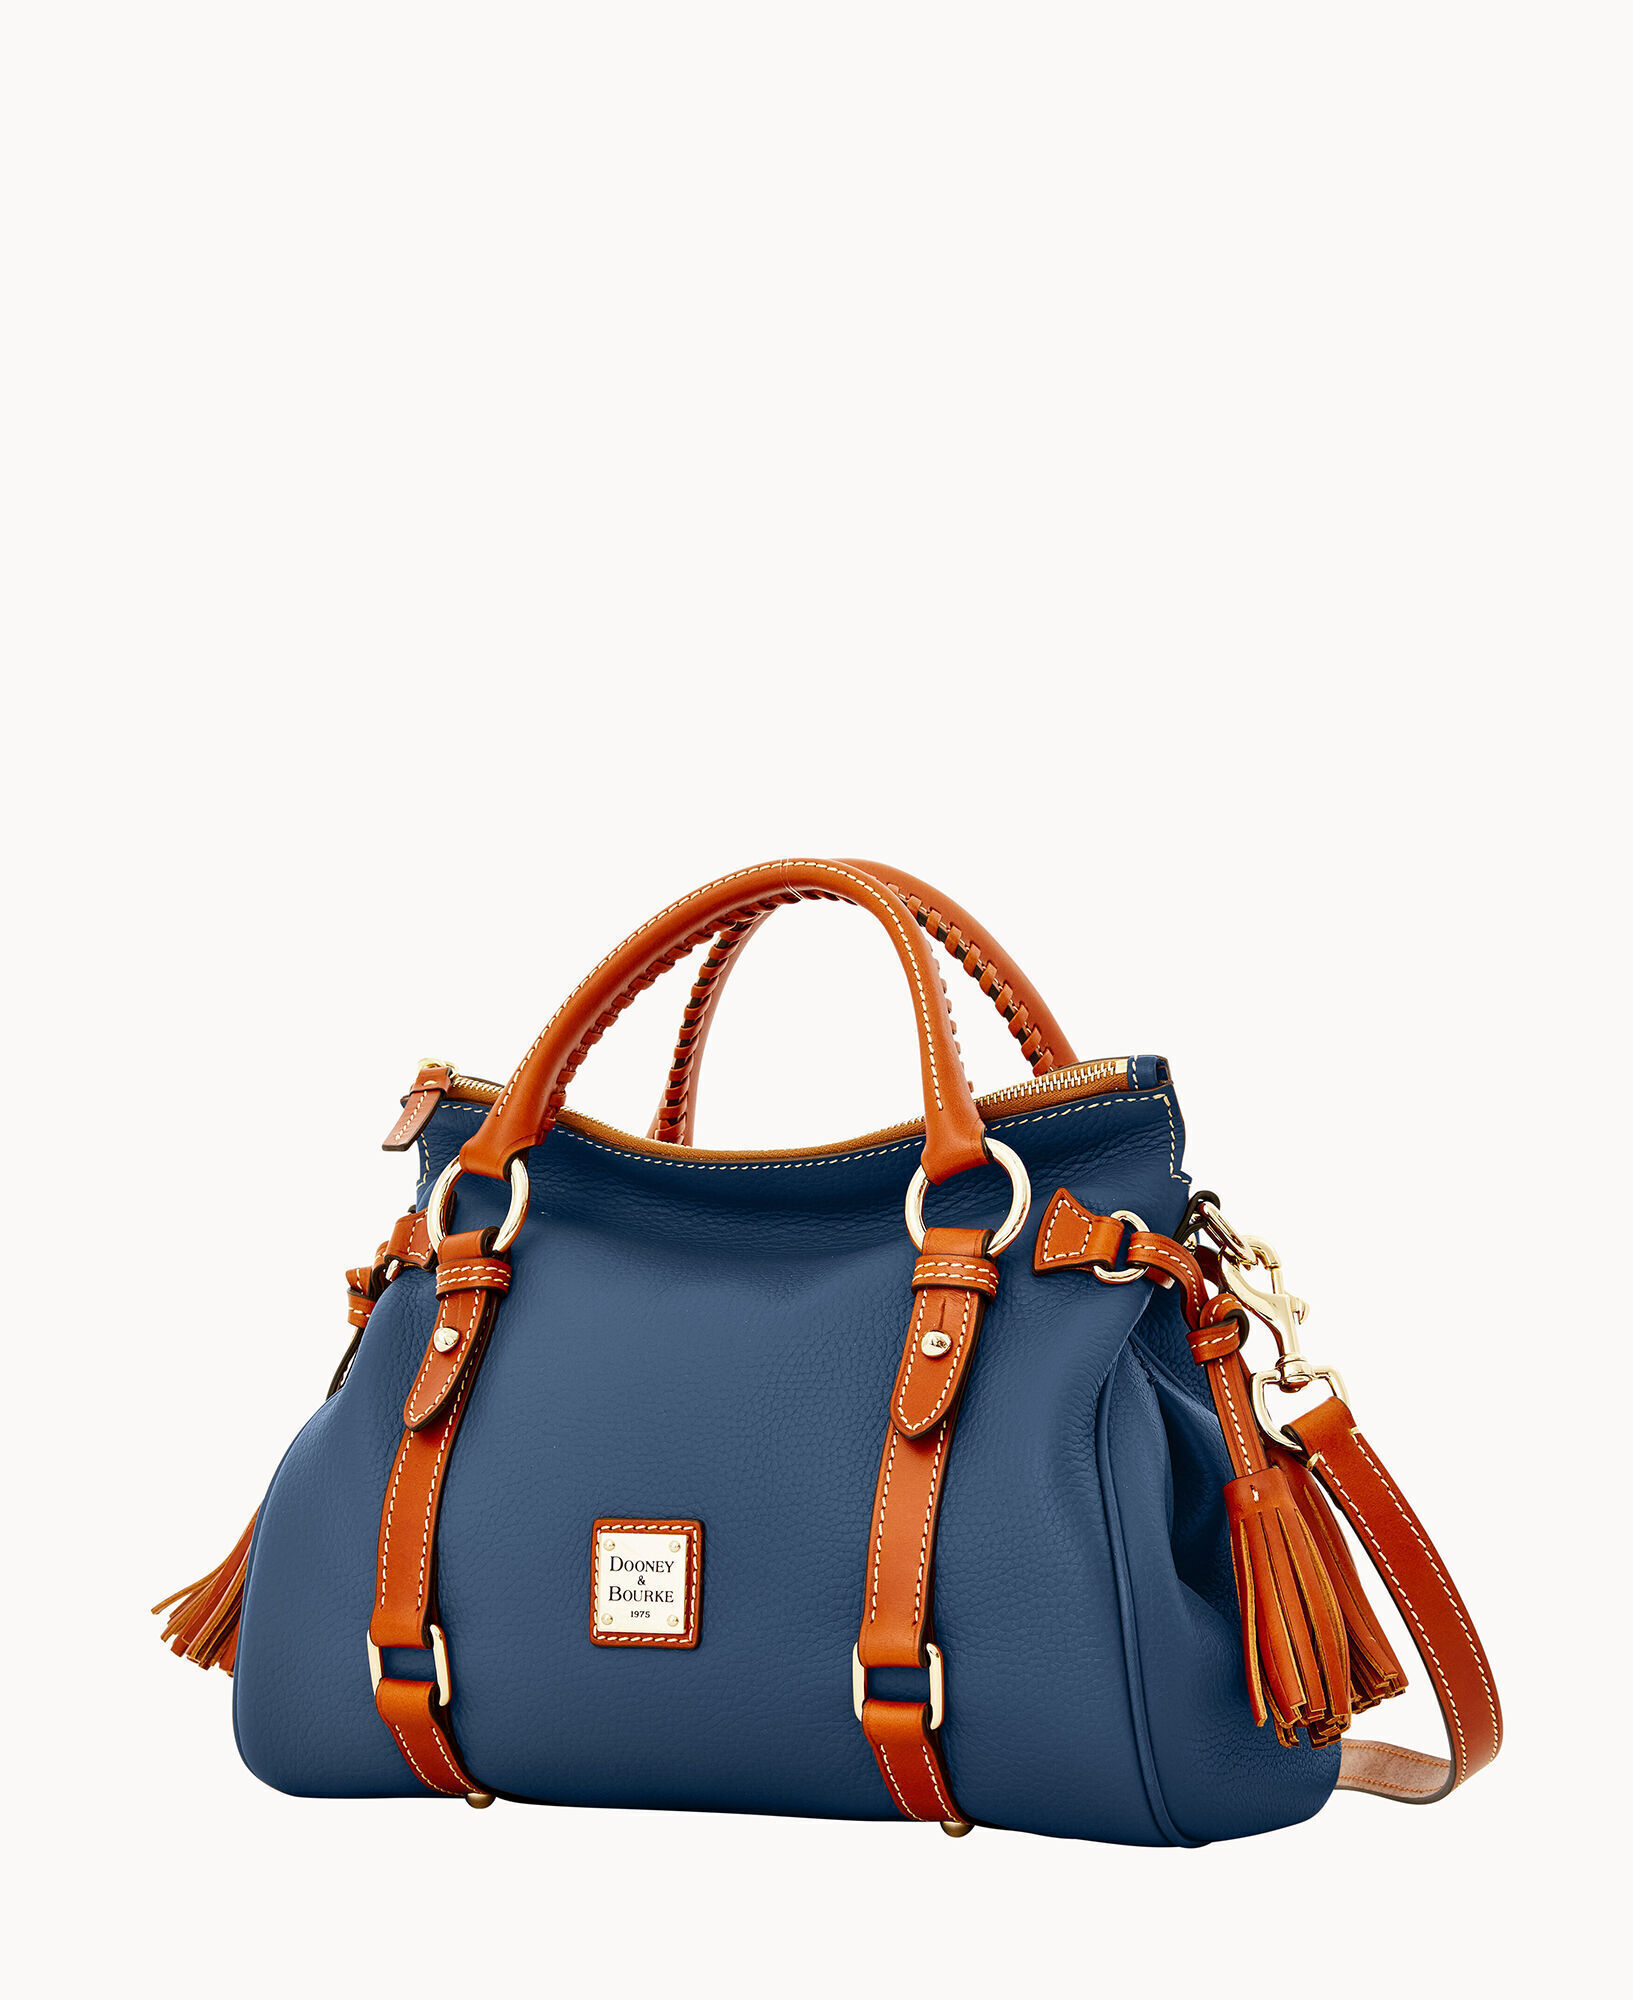 For Sale: Brand New with Tags Authentic Dooney & Bourke Pebble